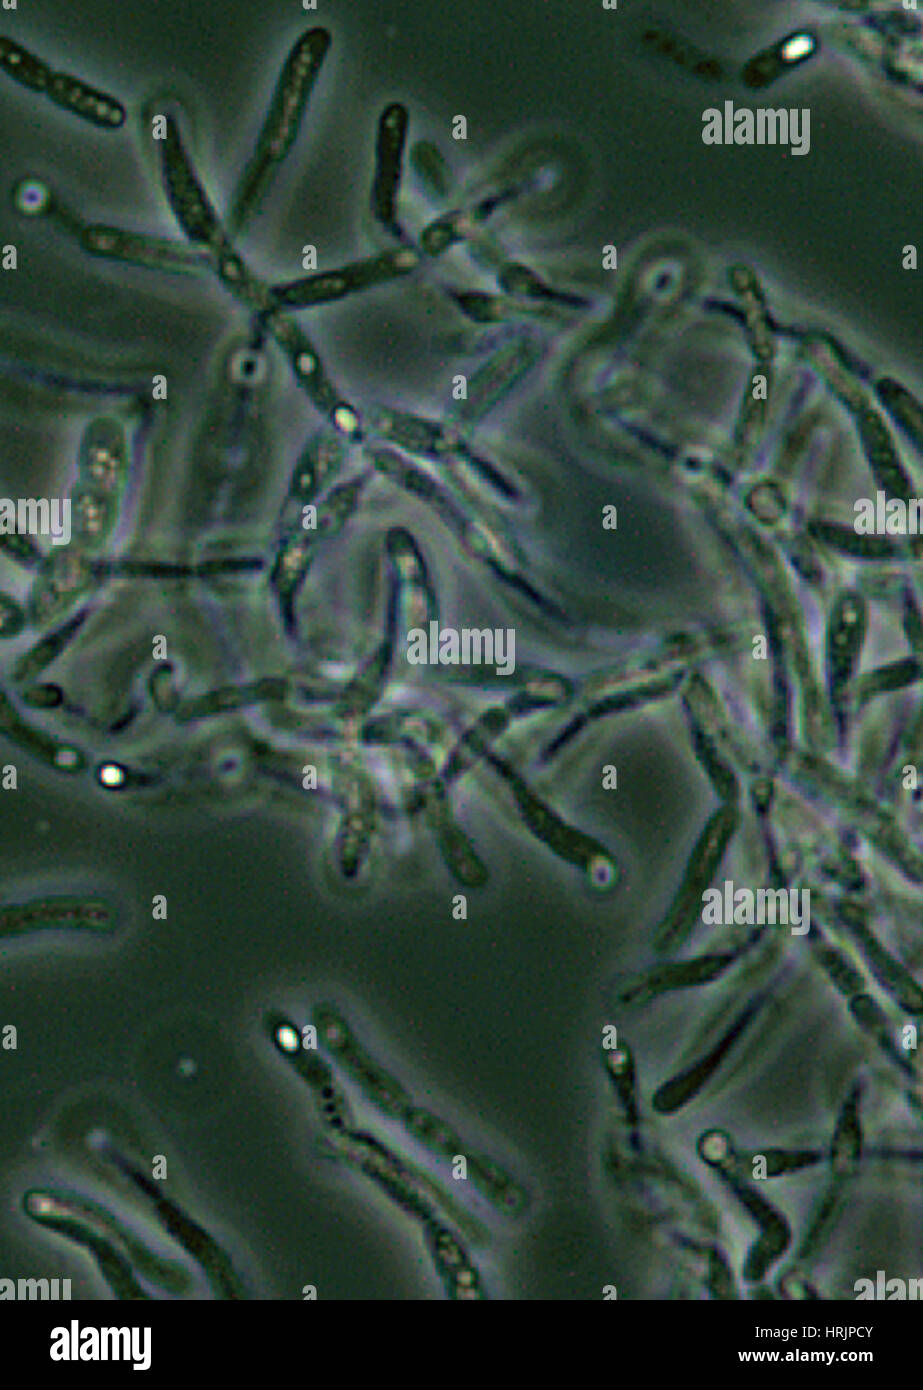 Anthrax, Bacillus anthracis Bacteria, LM Stock Photo